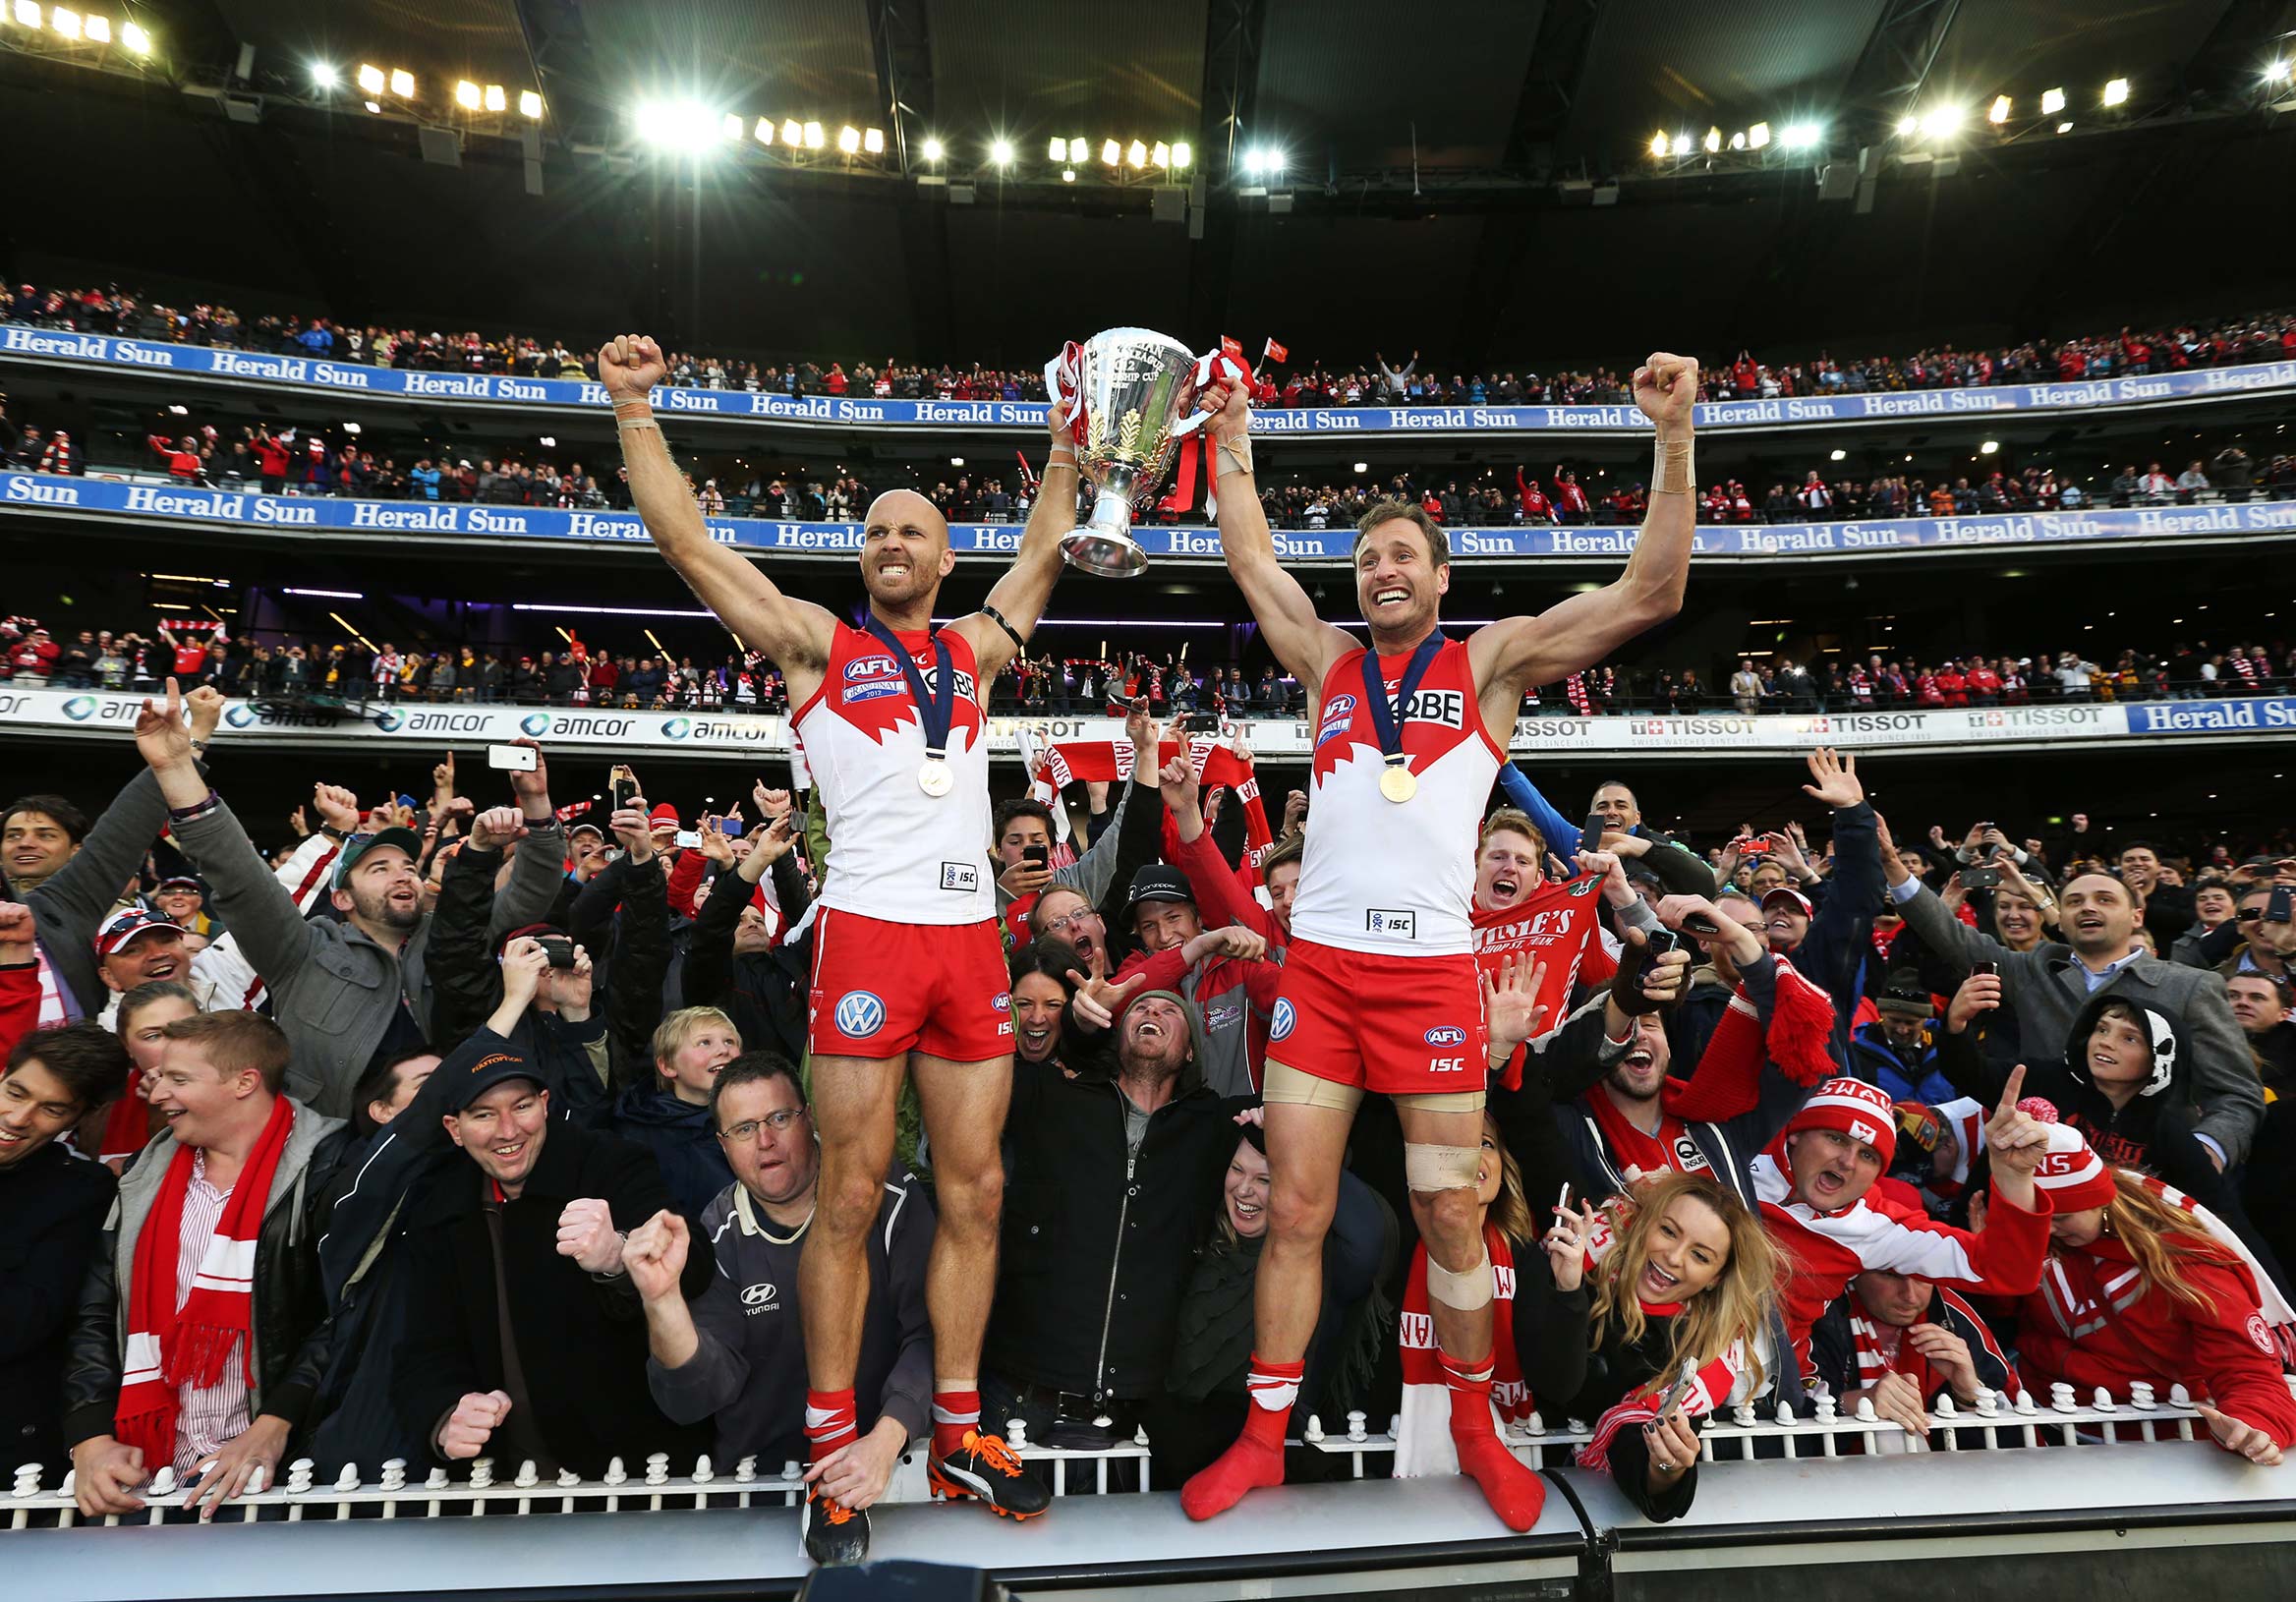   AFL Grand Final - Sydney Swans v Hawthorn at the MCG. Jarrad McVeigh and Jude Bolton of the Swans celebrate with the cup  